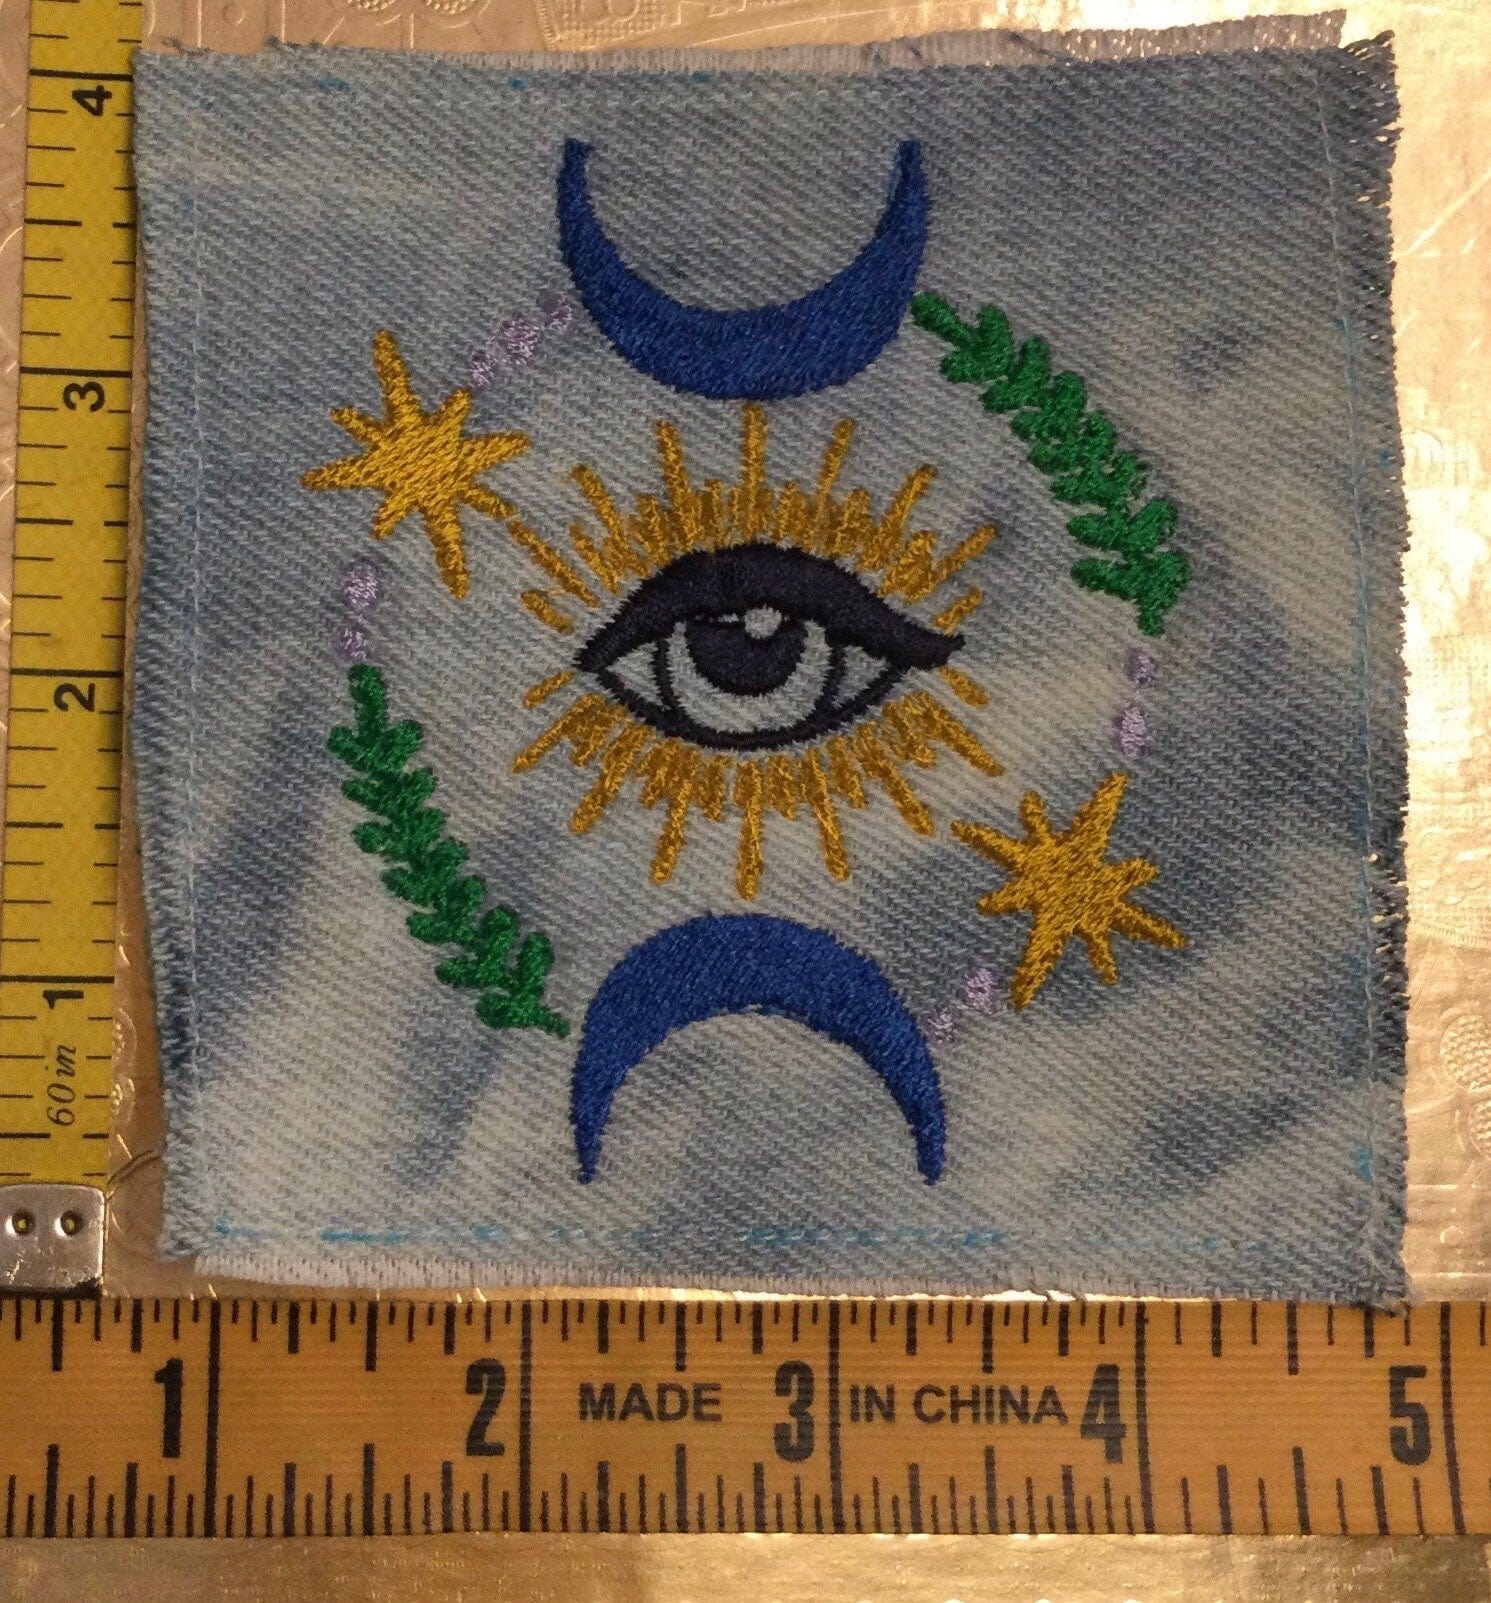 SOULE PATCH Protective Eye Indigo Bleached DENIM Handmade Patch Embroidered Colorful Appliques & Patches